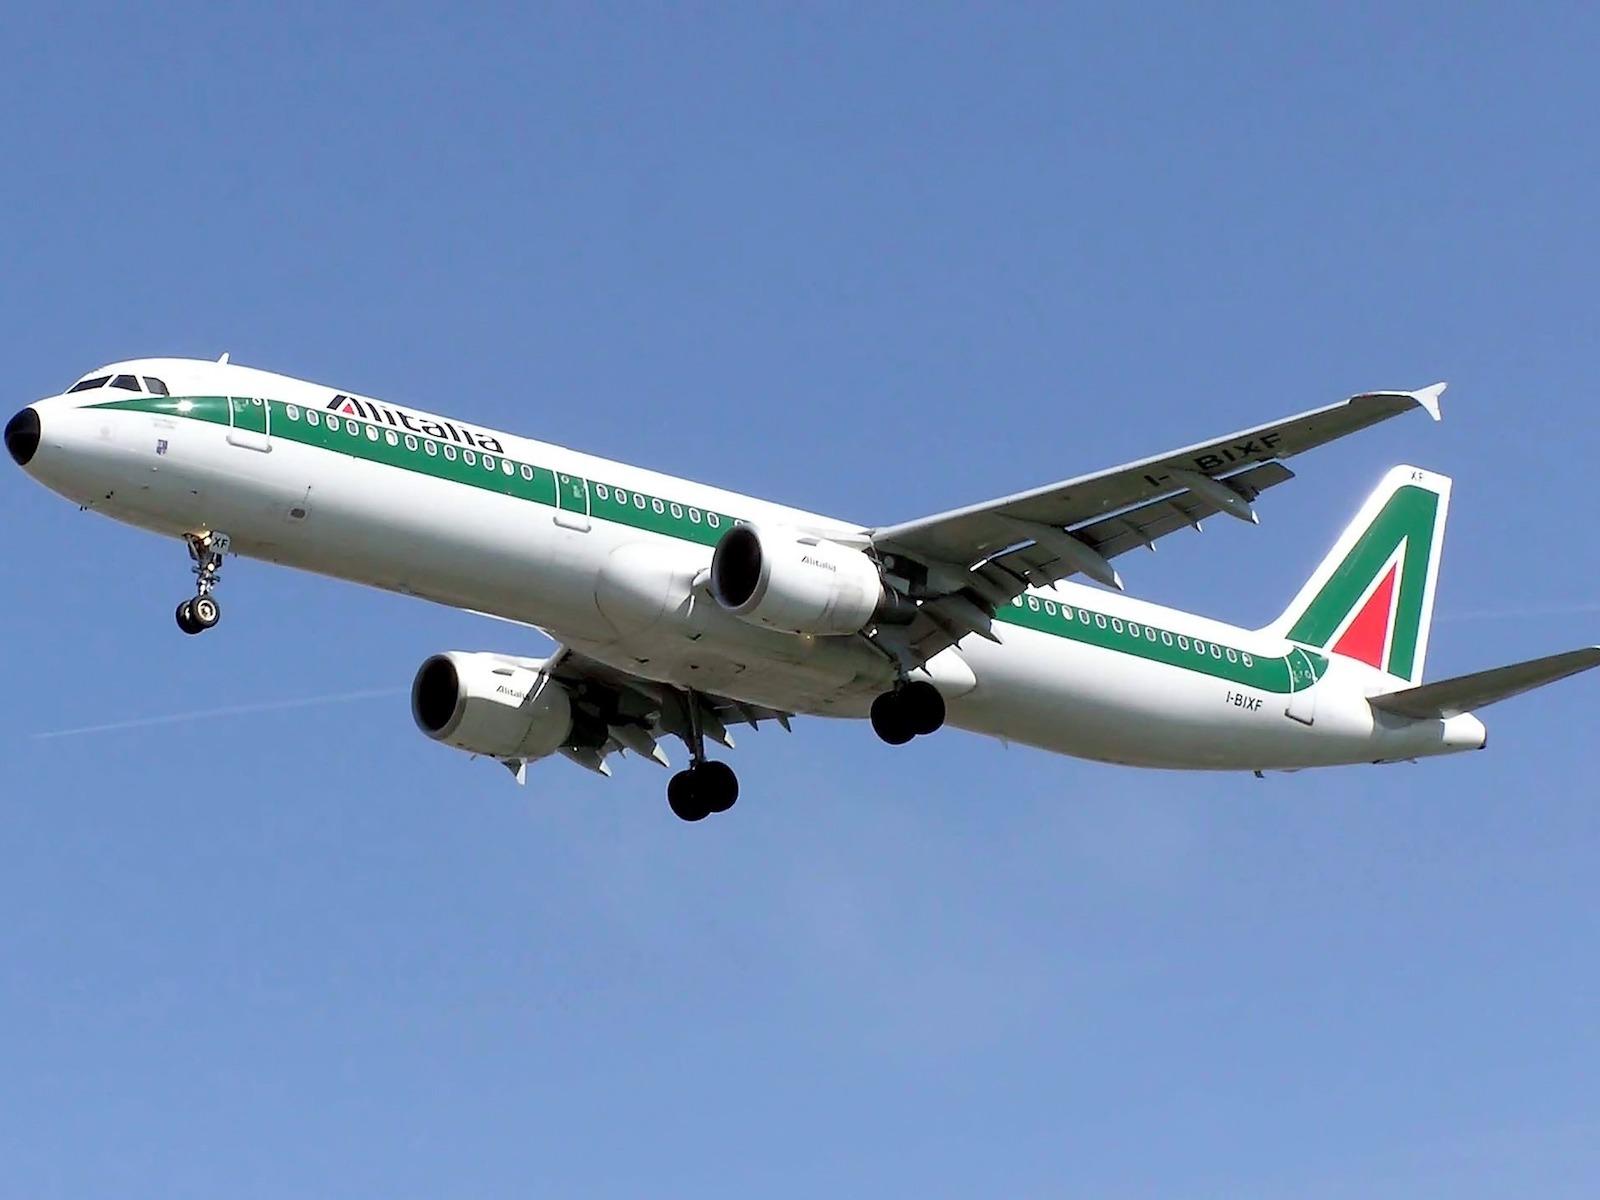 Alitalia allows you to Transfer Points to Someone Else